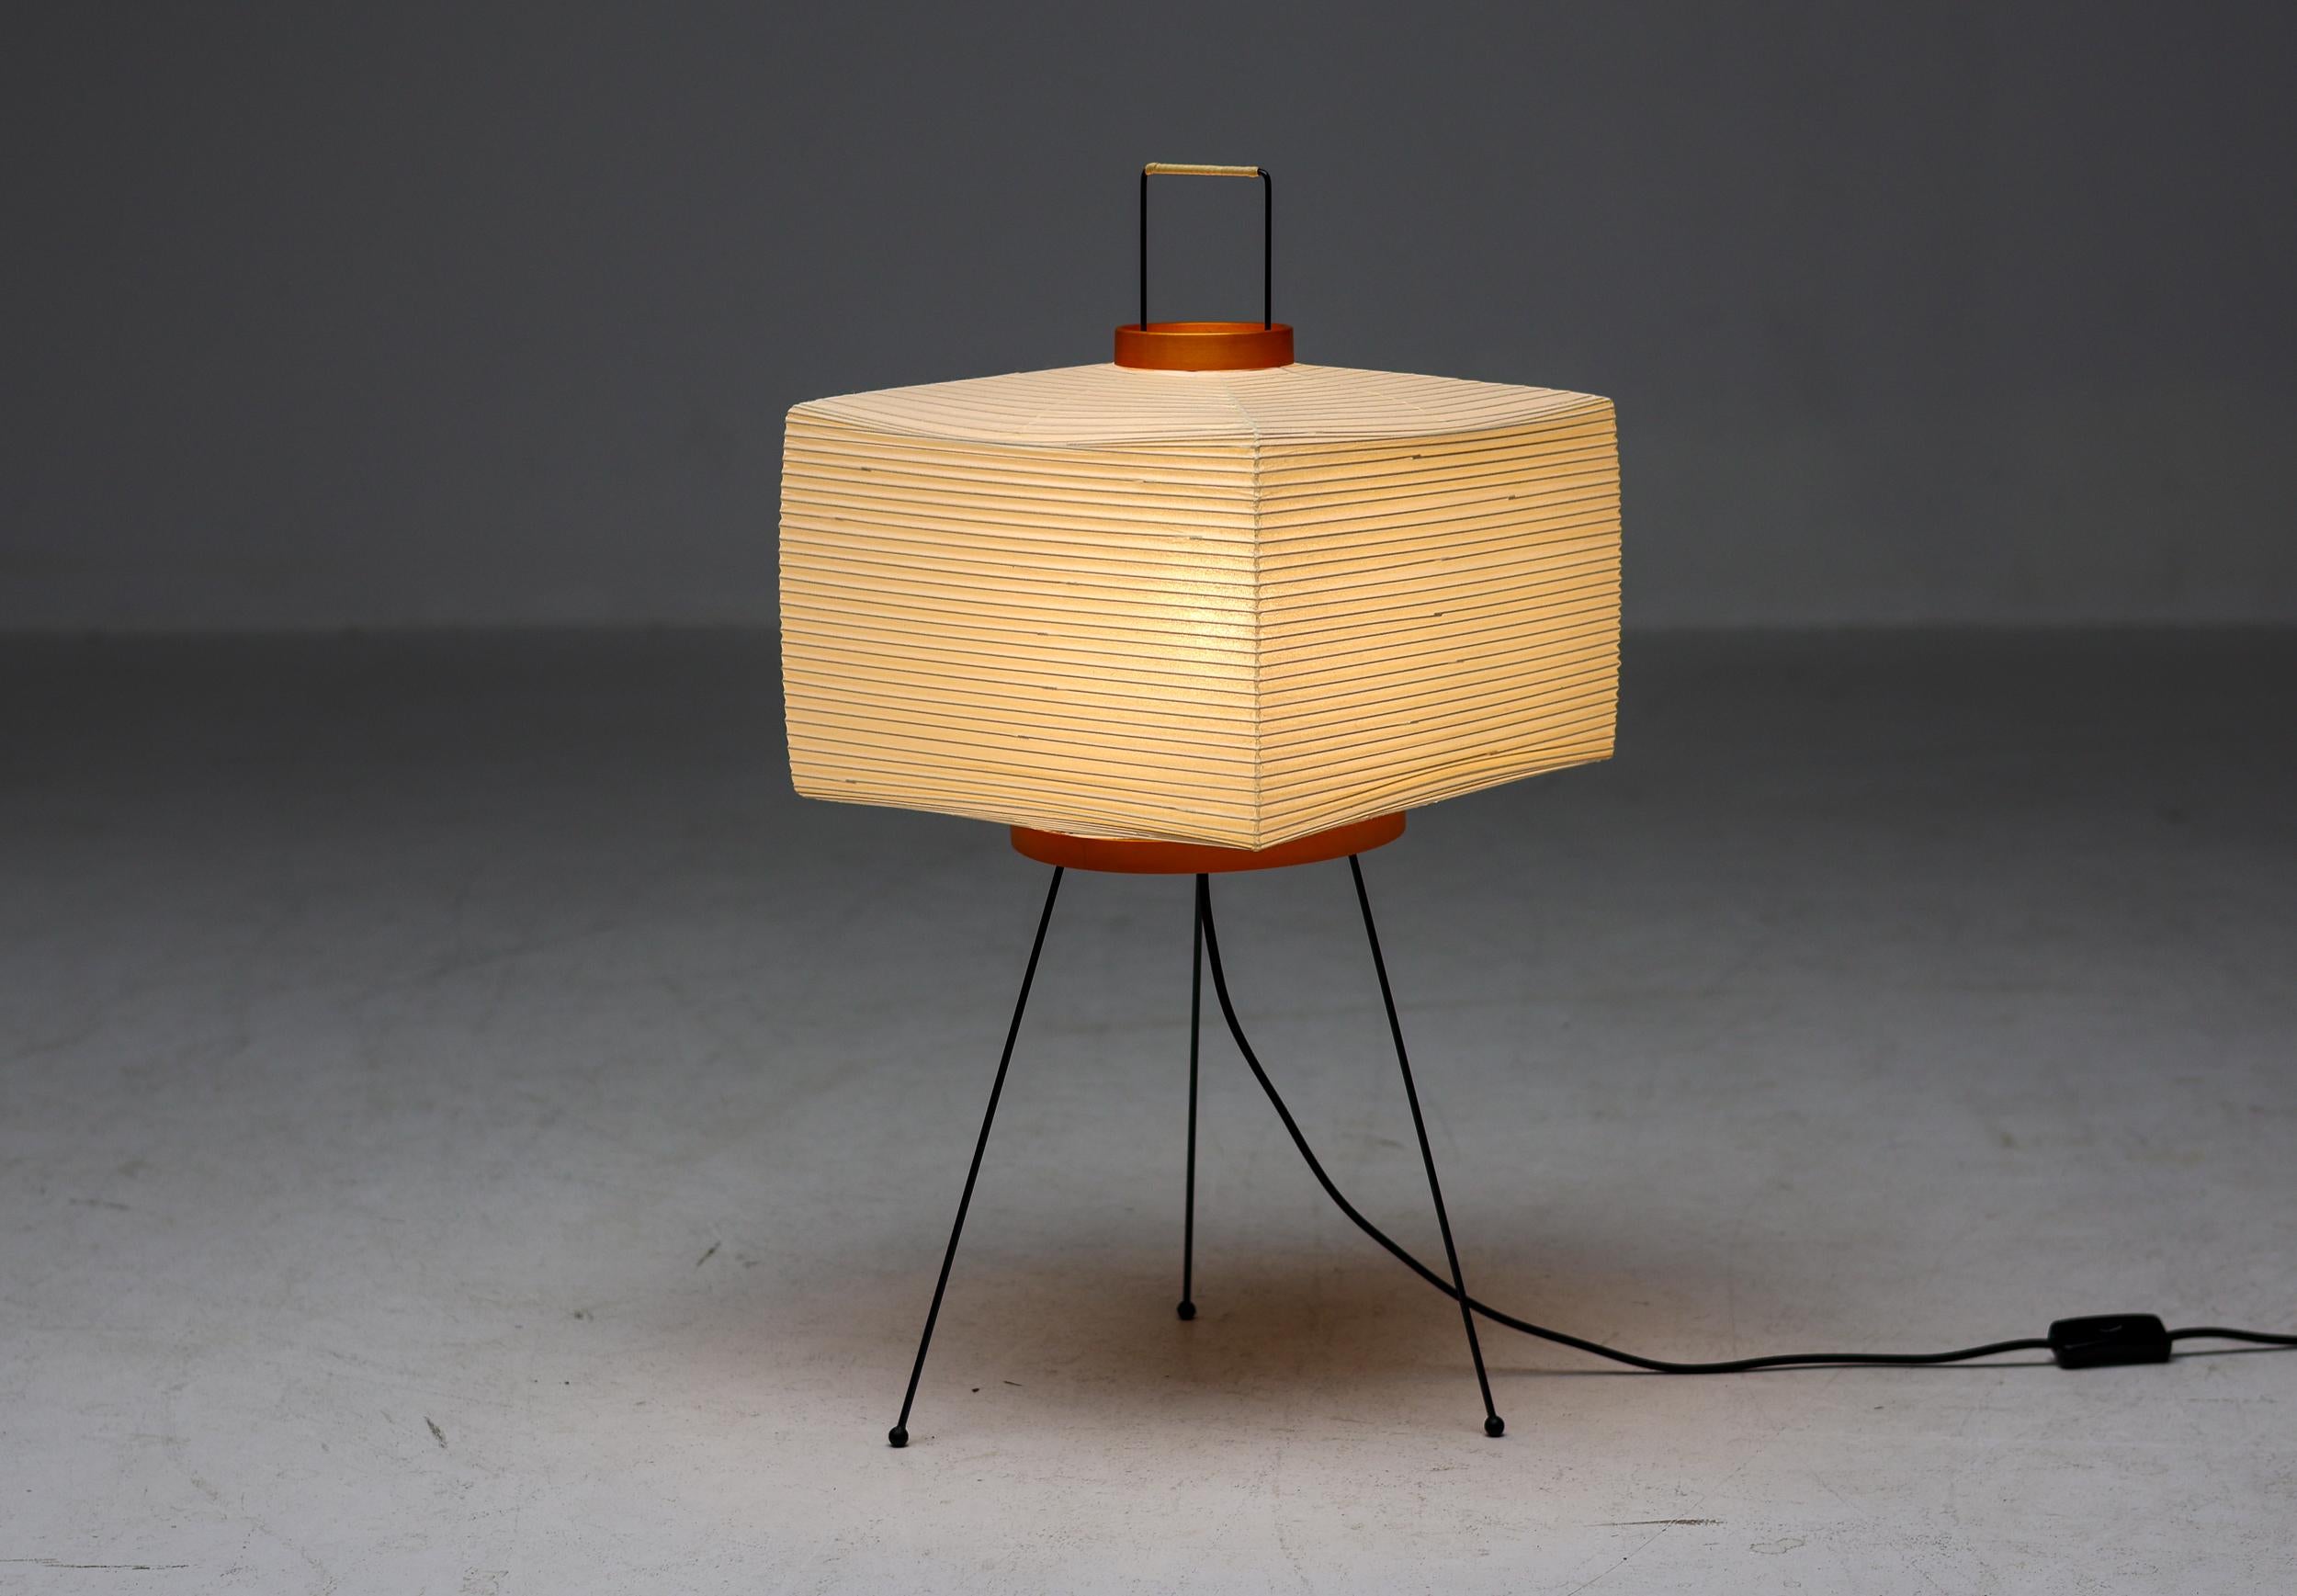 Model number 7A table or floor lamp by Isamu Noguchi for Akari. 
Original version manufactured by Ozeki & co in Japan. 
Rice paper, enameled metal. Retains manufacturer's original stamp, original box included.
Excellent all original condition.